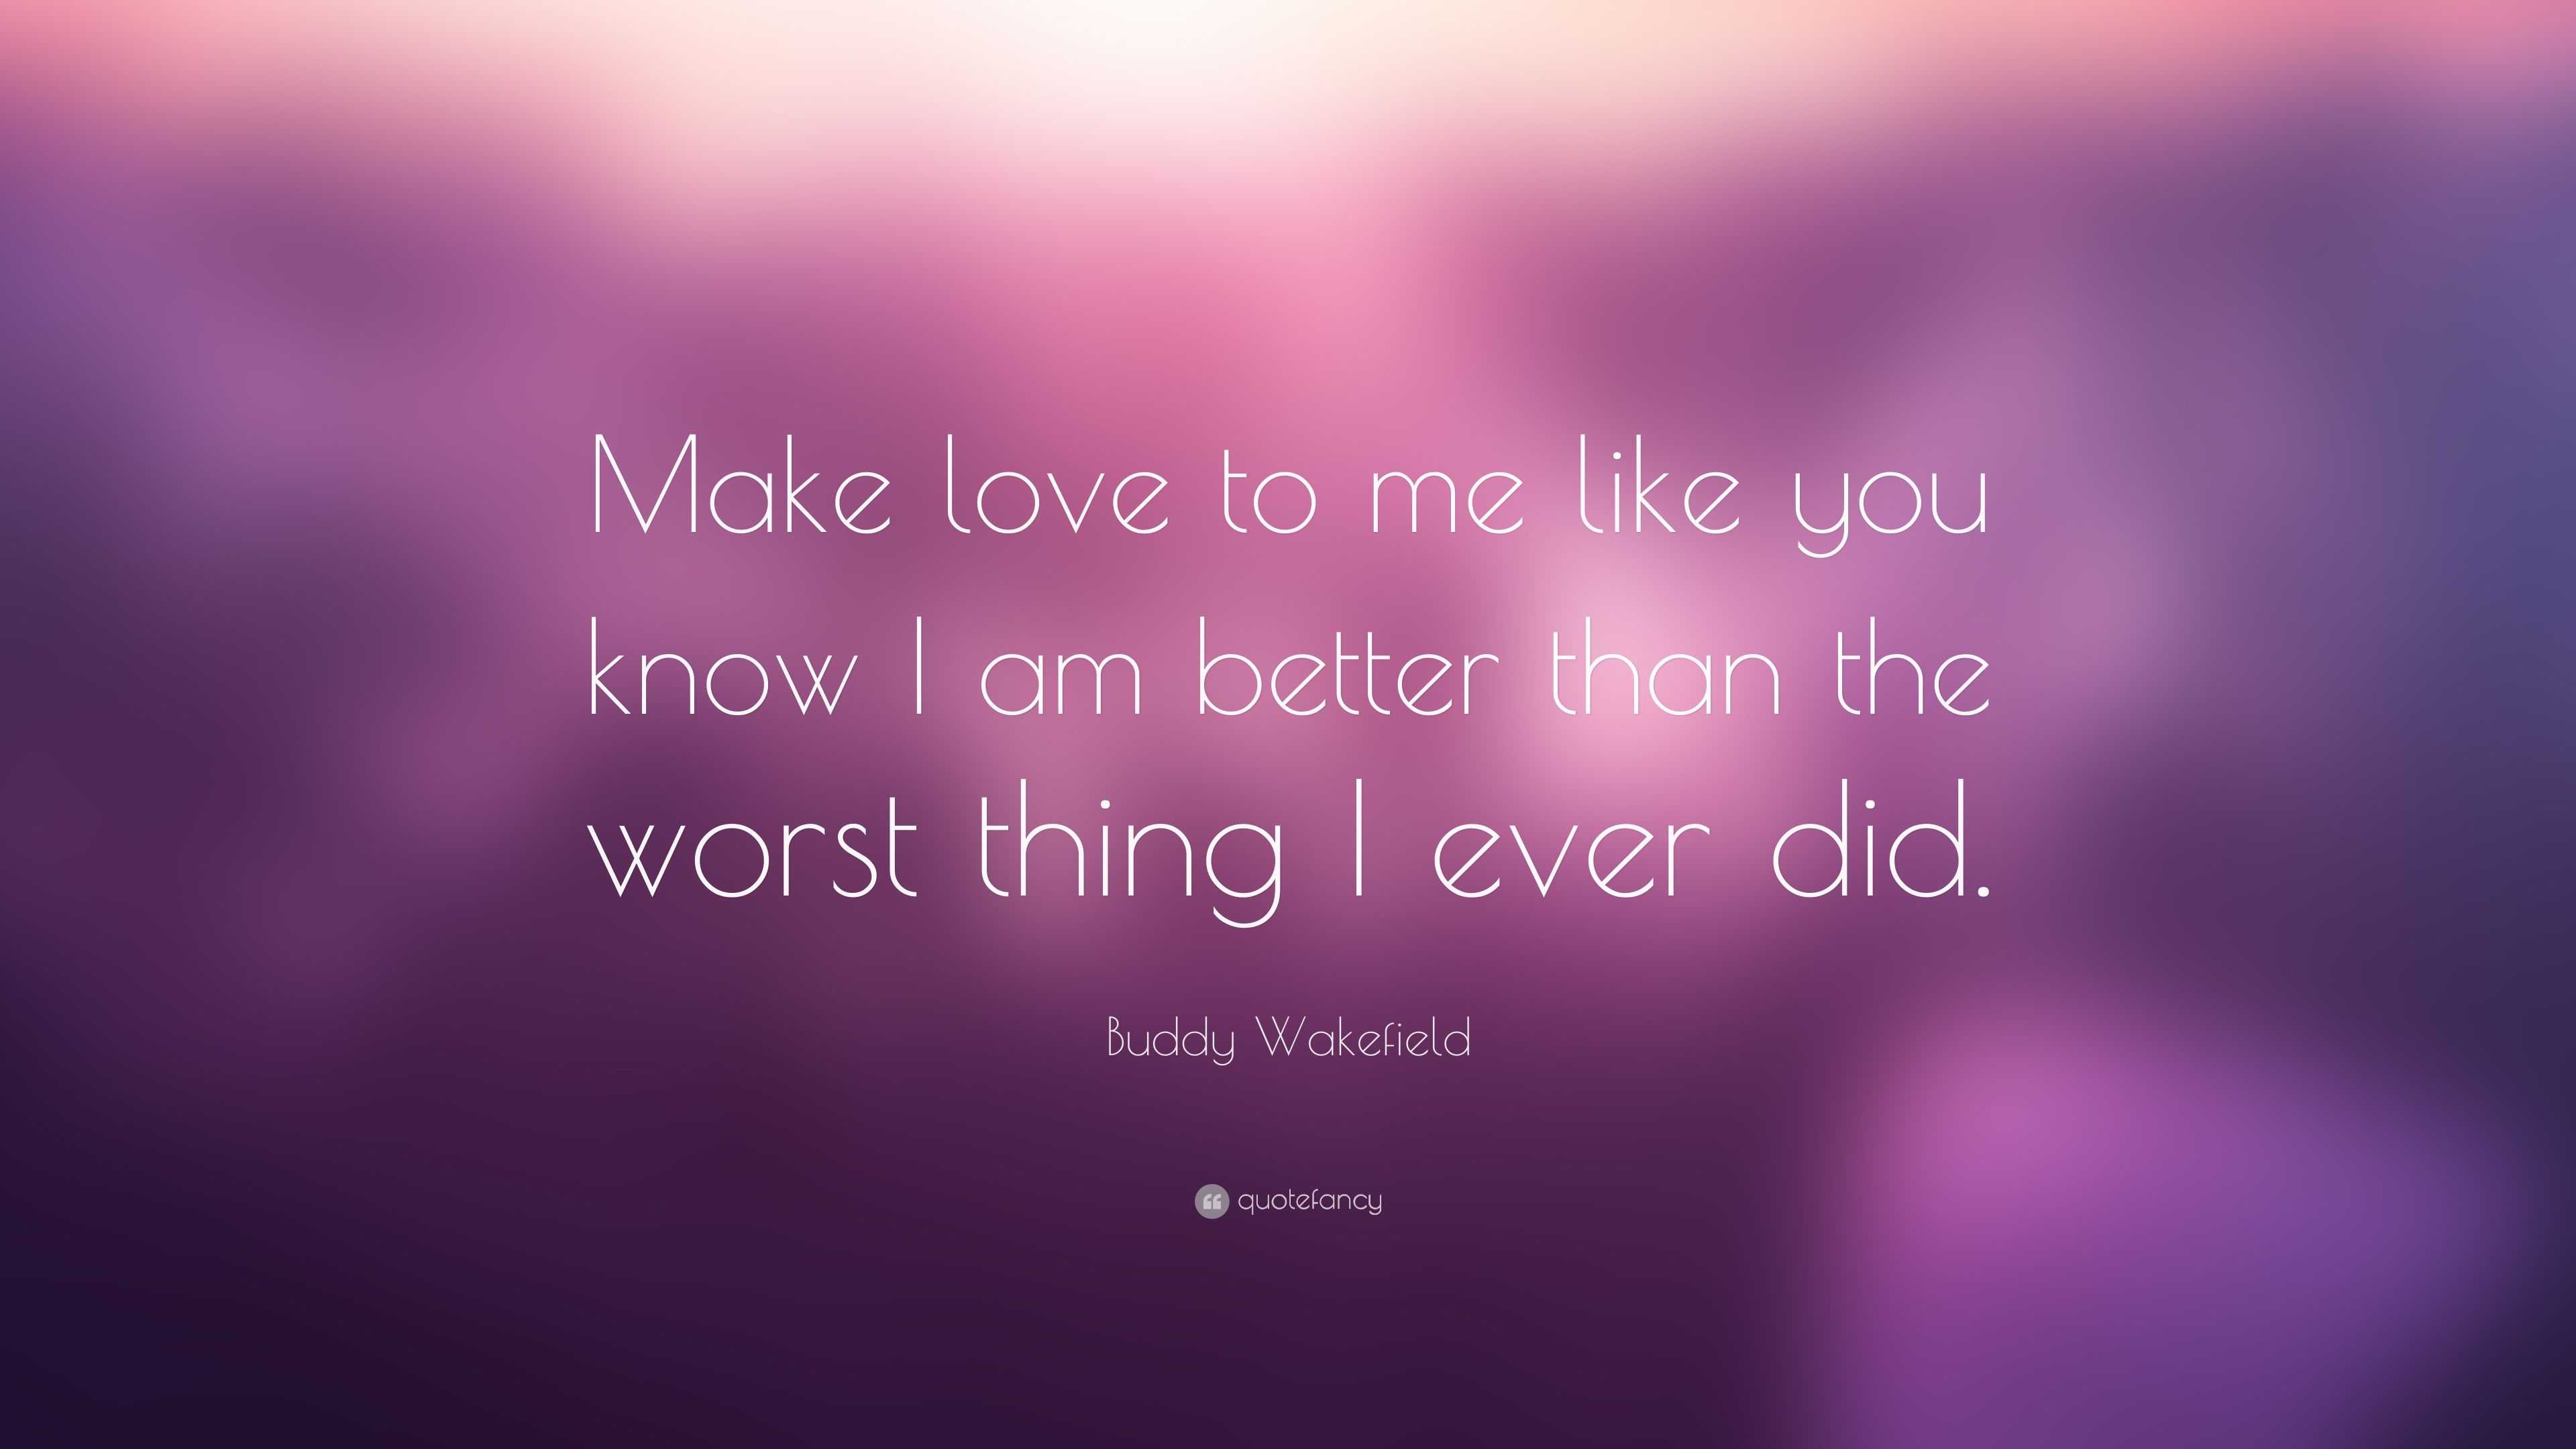 Buddy Wakefield Quote “Make love to me like you know I am better than